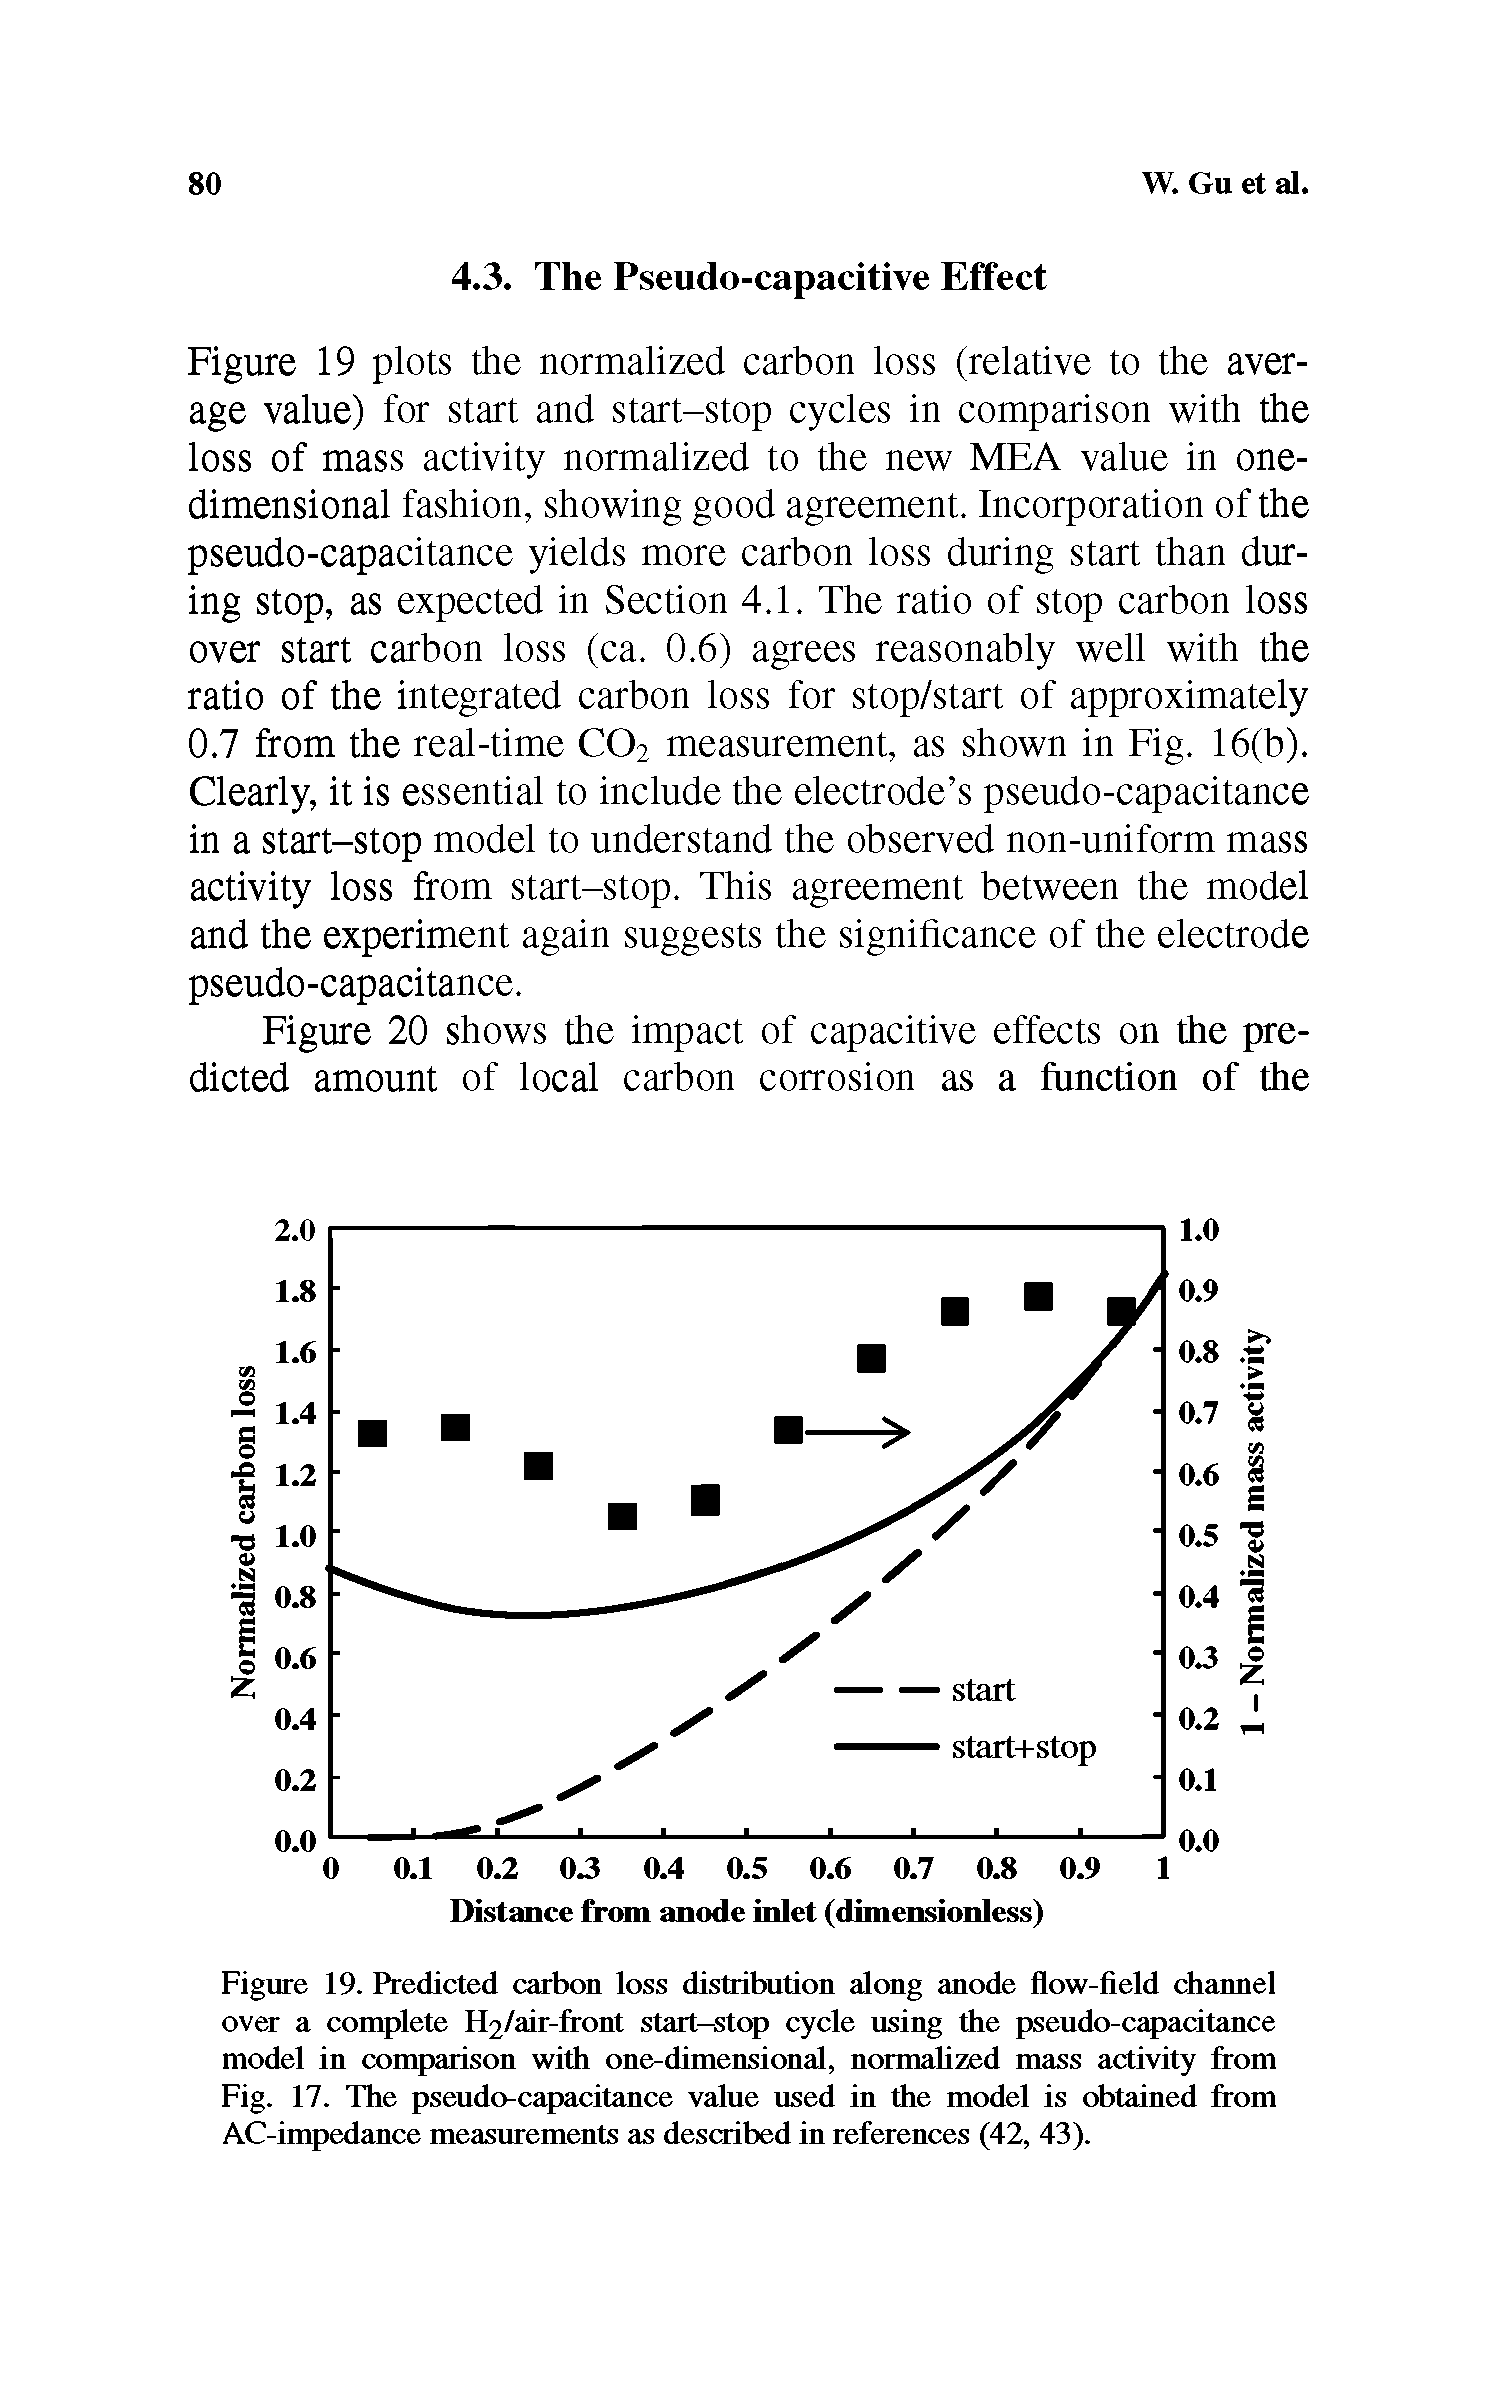 Figure 19. Predicted carbon loss distribution along anode flow-field channel over a complete H2/air-front start—stop cycle using the pseudo-capacitance model in comparison with one-dimensional, normalized mass activity from Fig. 17. The pseudo-capacitance value used in the model is obtained from AC-impedance measurements as described in references (42, 43).